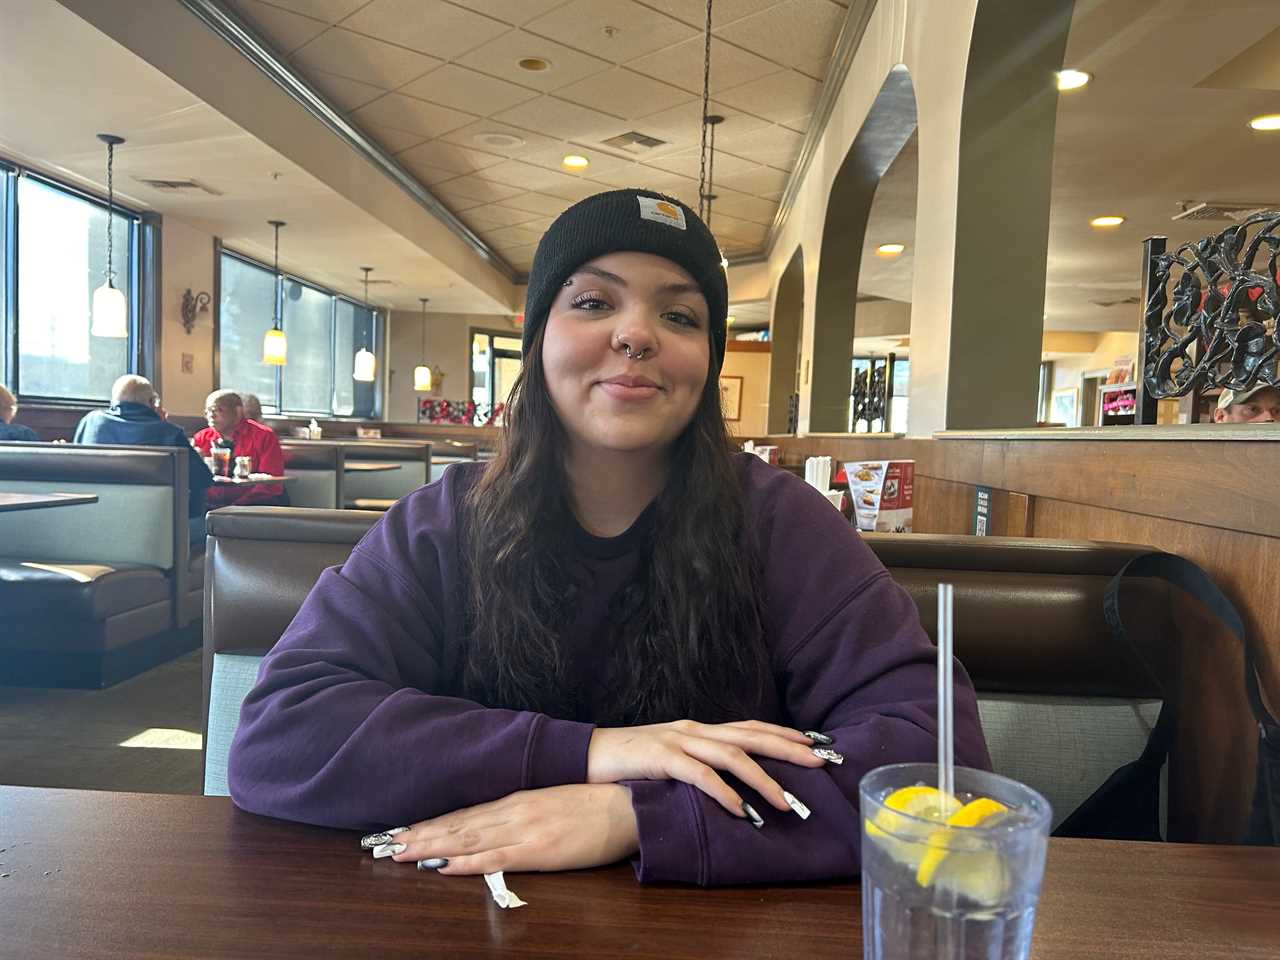 Picture of the writer wearing a purple sweatshirt and a black beanie in a booth at Perkins. People sit at other booths in the background